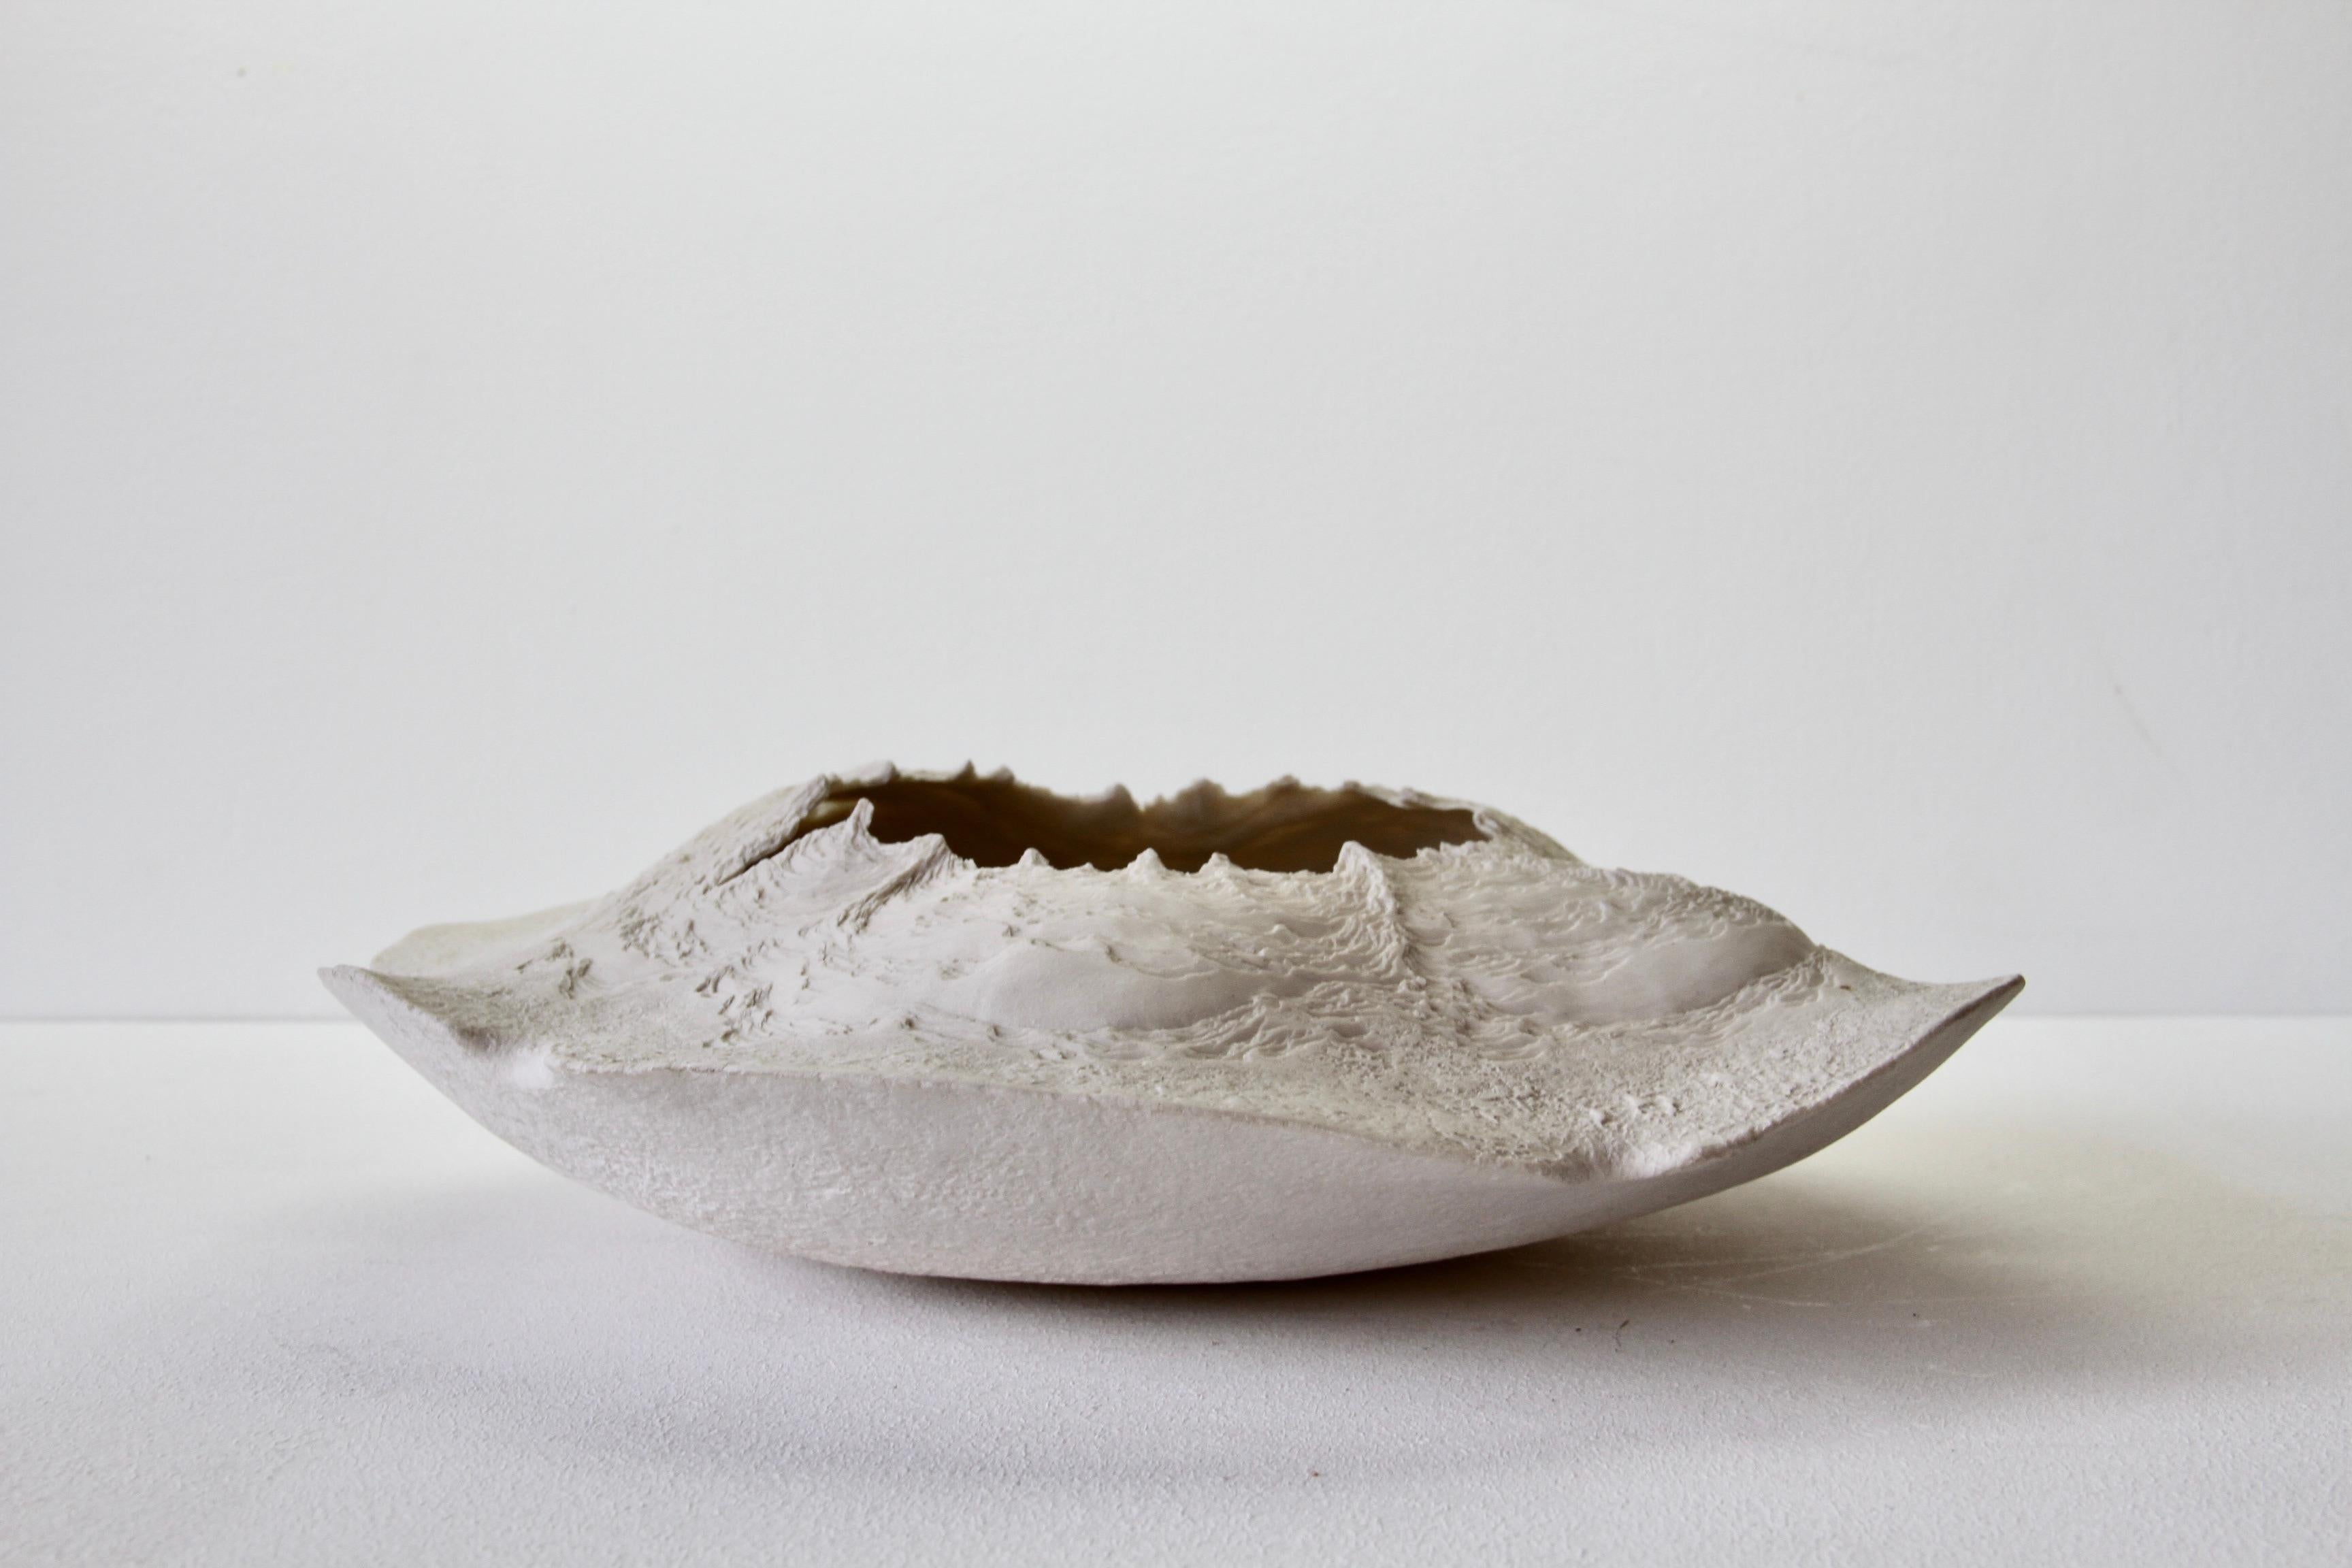 Maggie Barnes Carved White Organic Art Pottery Sculpture Bowl or Dish circa 1987 For Sale 5